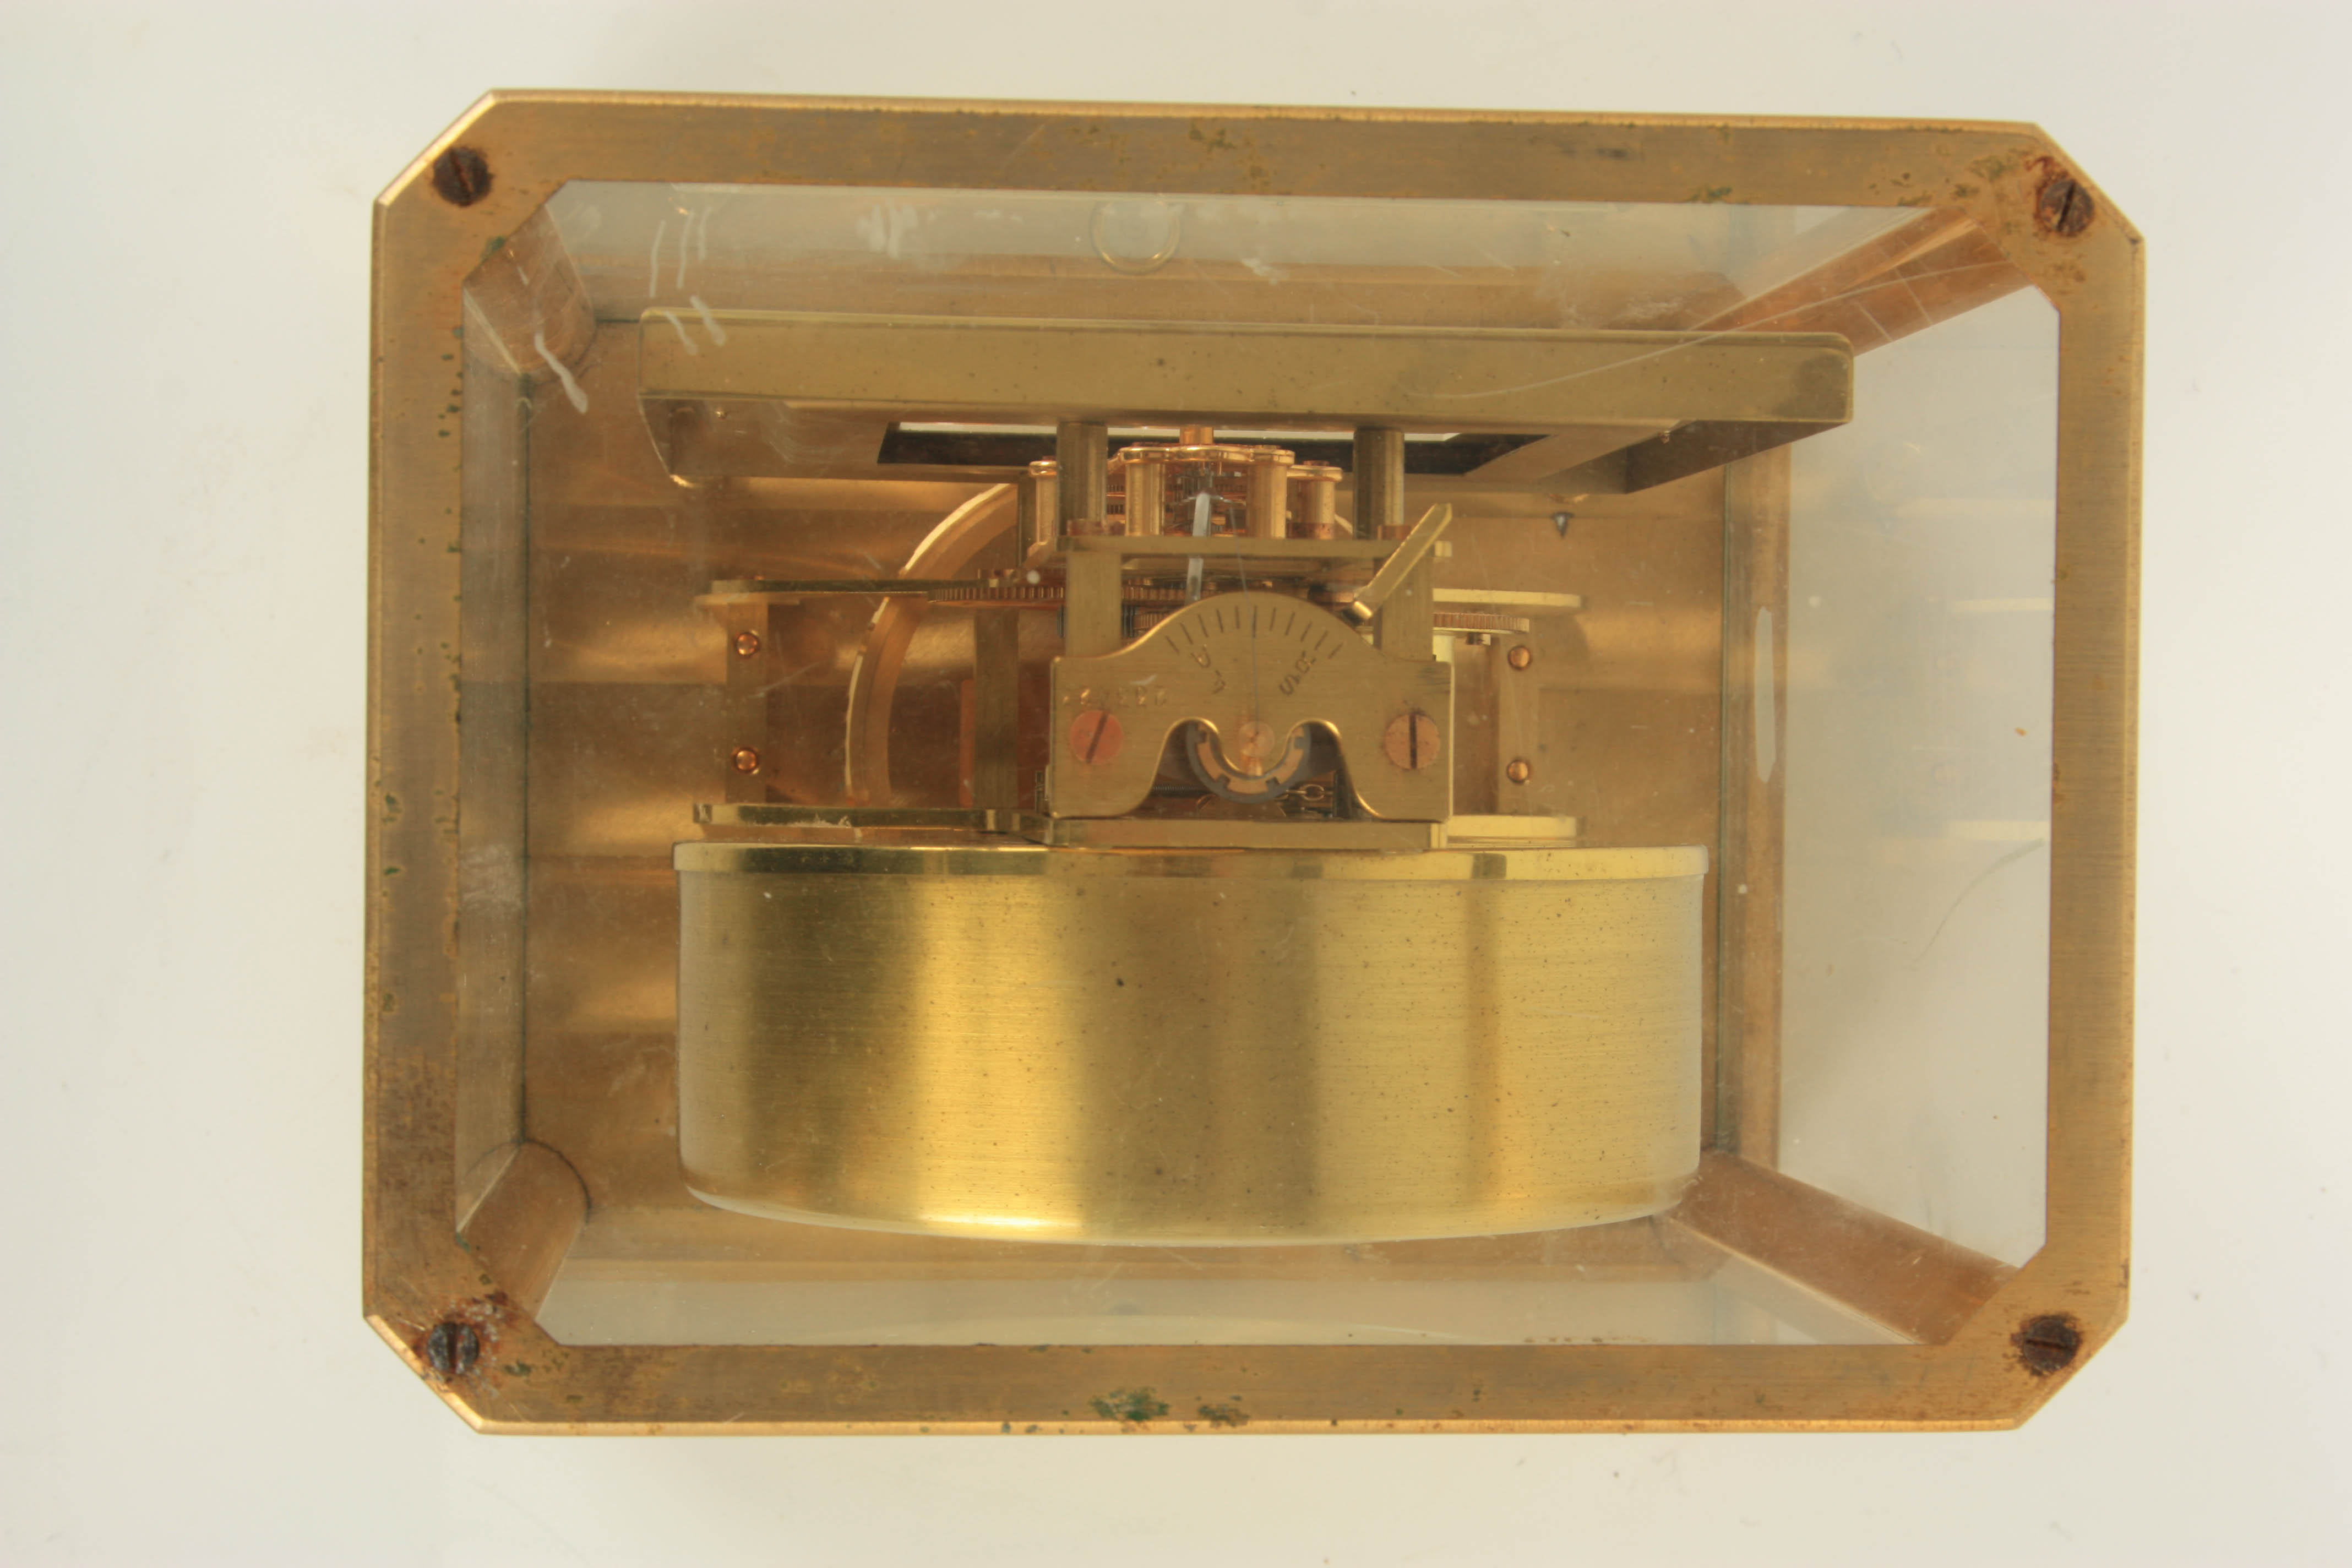 A JAEGER-LECOULTRE ATMOS CLOCK the gilt brass framed case with removable front glass panel enclosing - Image 7 of 8